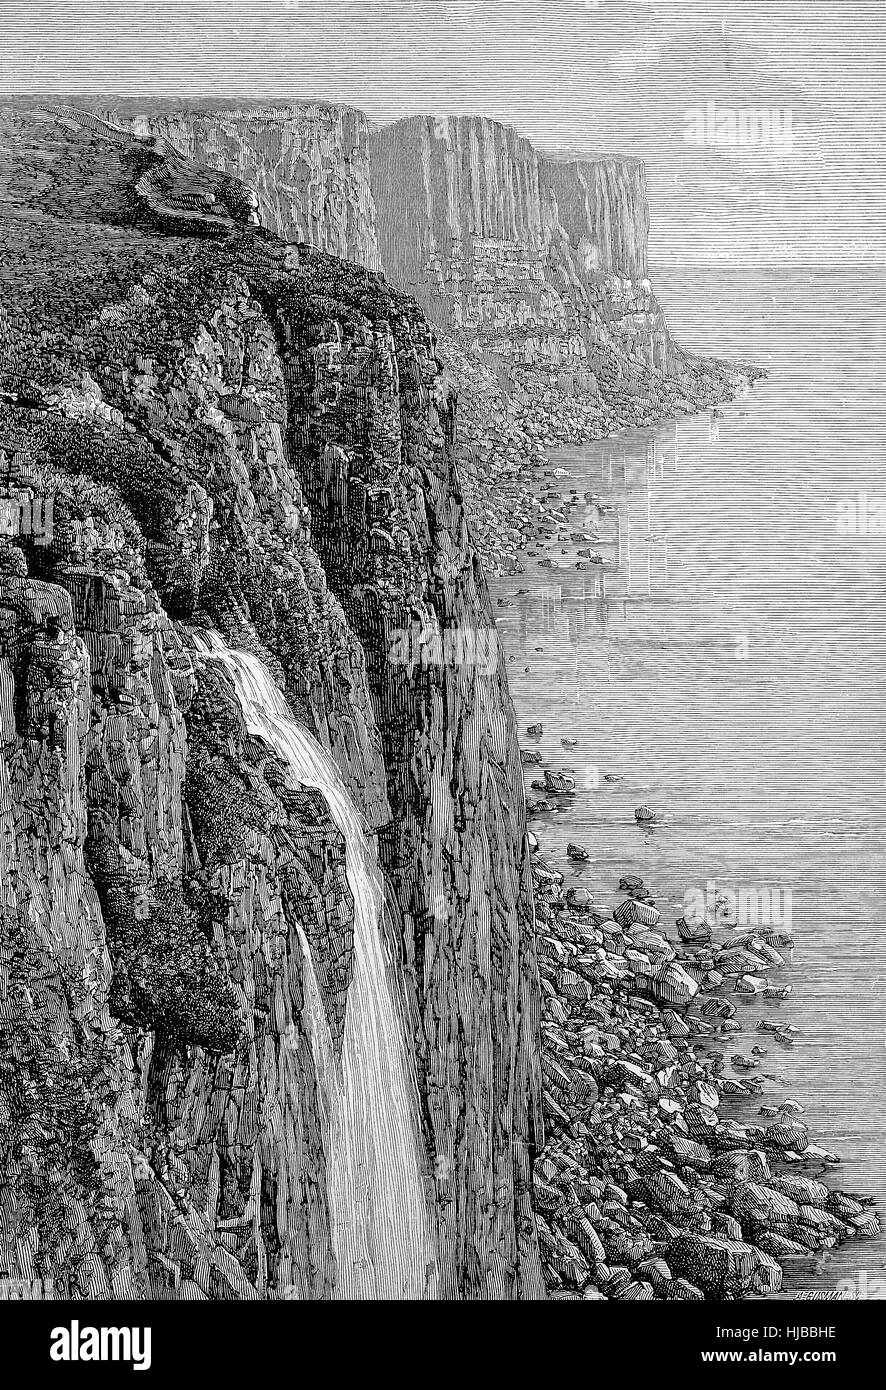 Island of Skye, Scotland, the Kilt Rock, historical image or illustration from the year 1894, digital improved Stock Photo